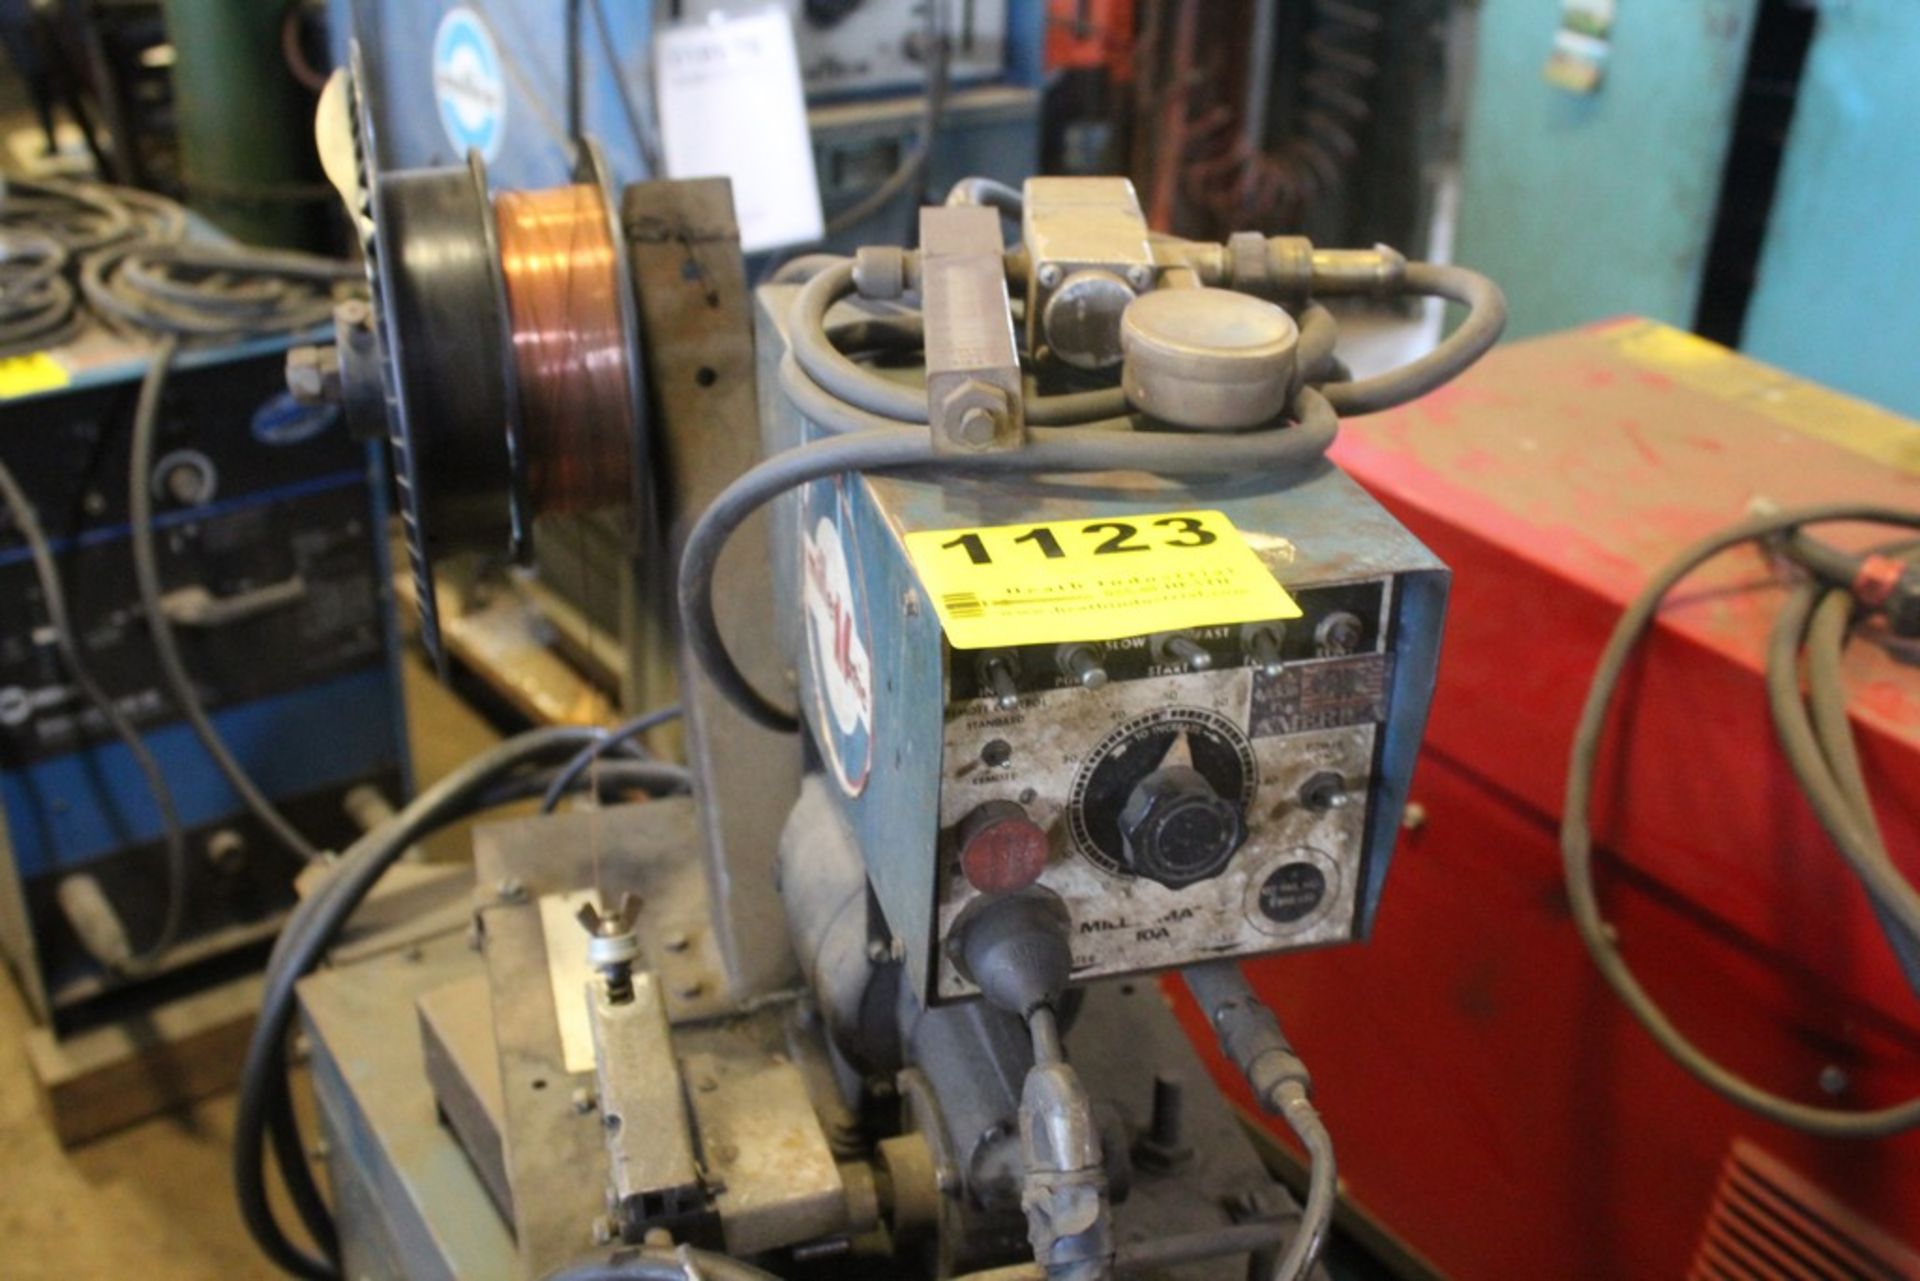 200 AMP MILLER WELDER WITH WIRE FEED ATTACHMENT MODEL CP200 POWER SUPPLY 200 AMP EQUIPPED WITH - Image 4 of 4